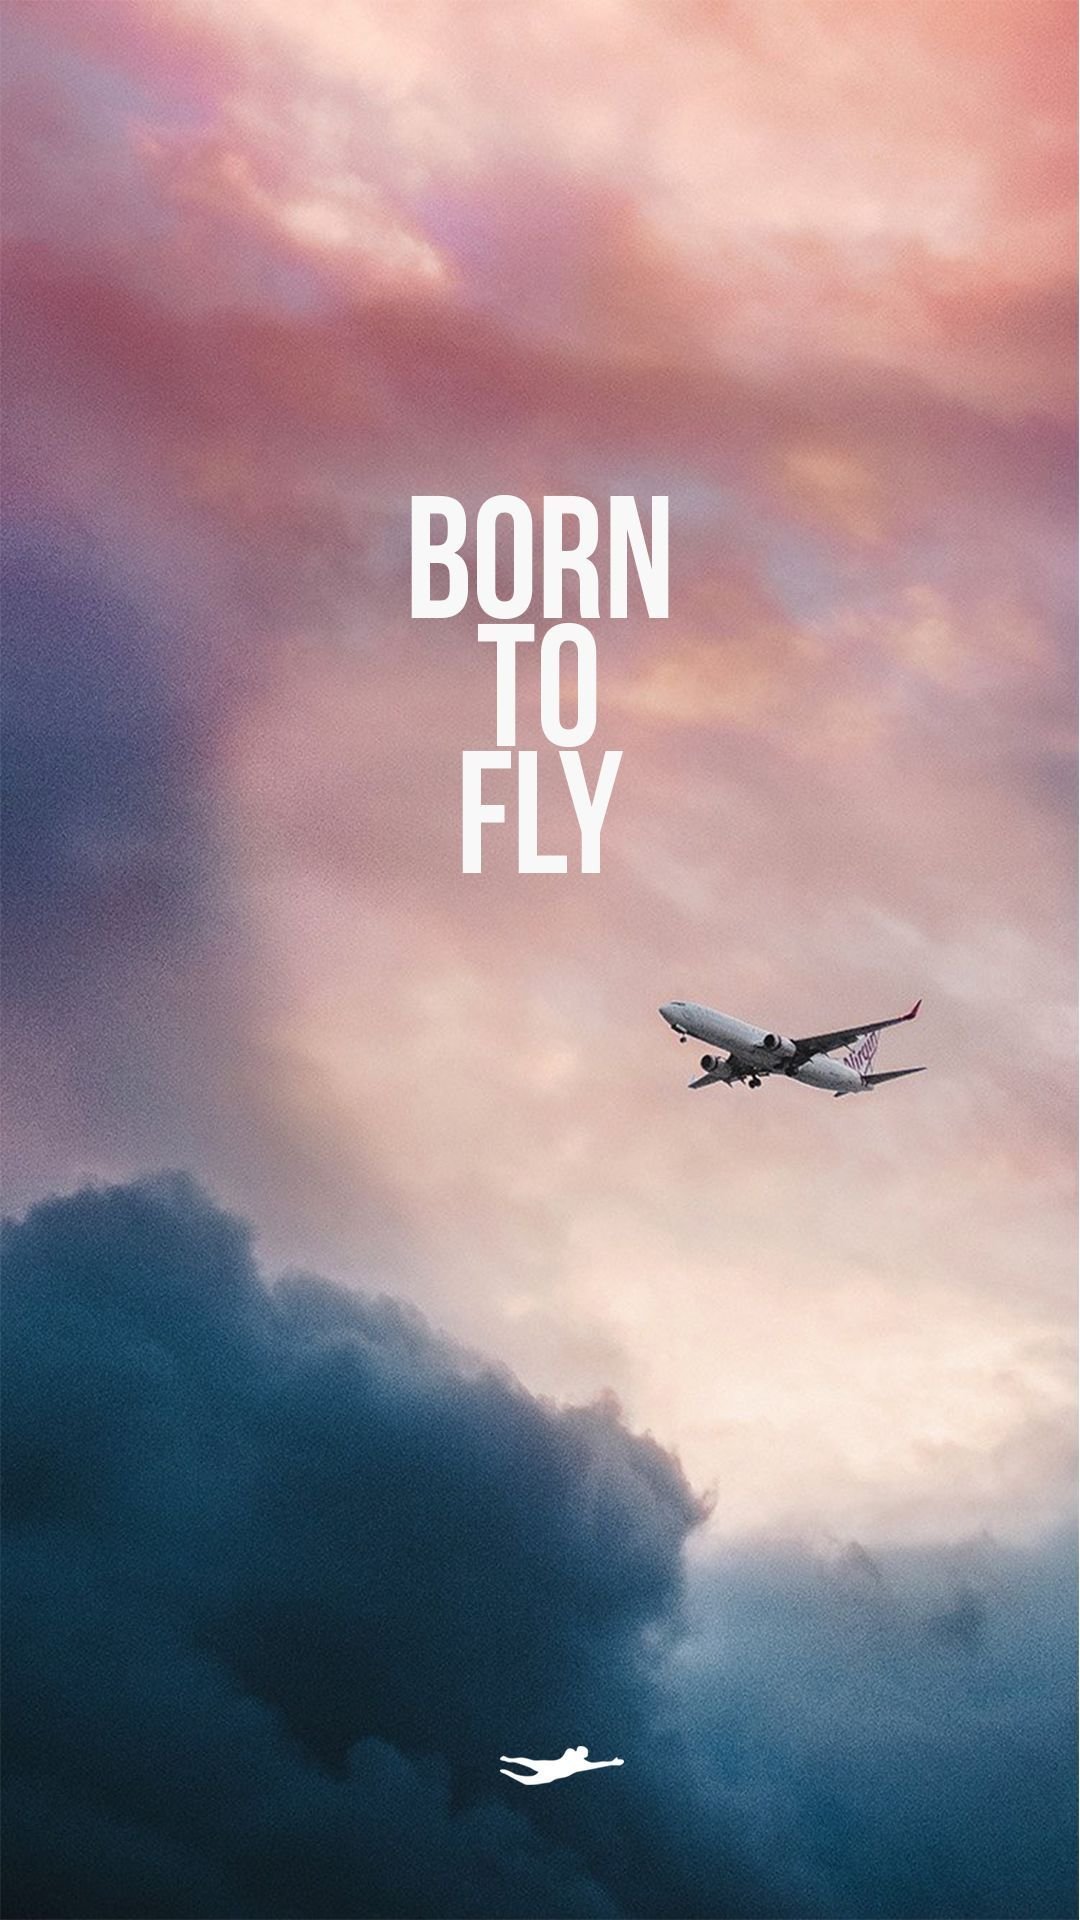 Born To Fly - Motivational